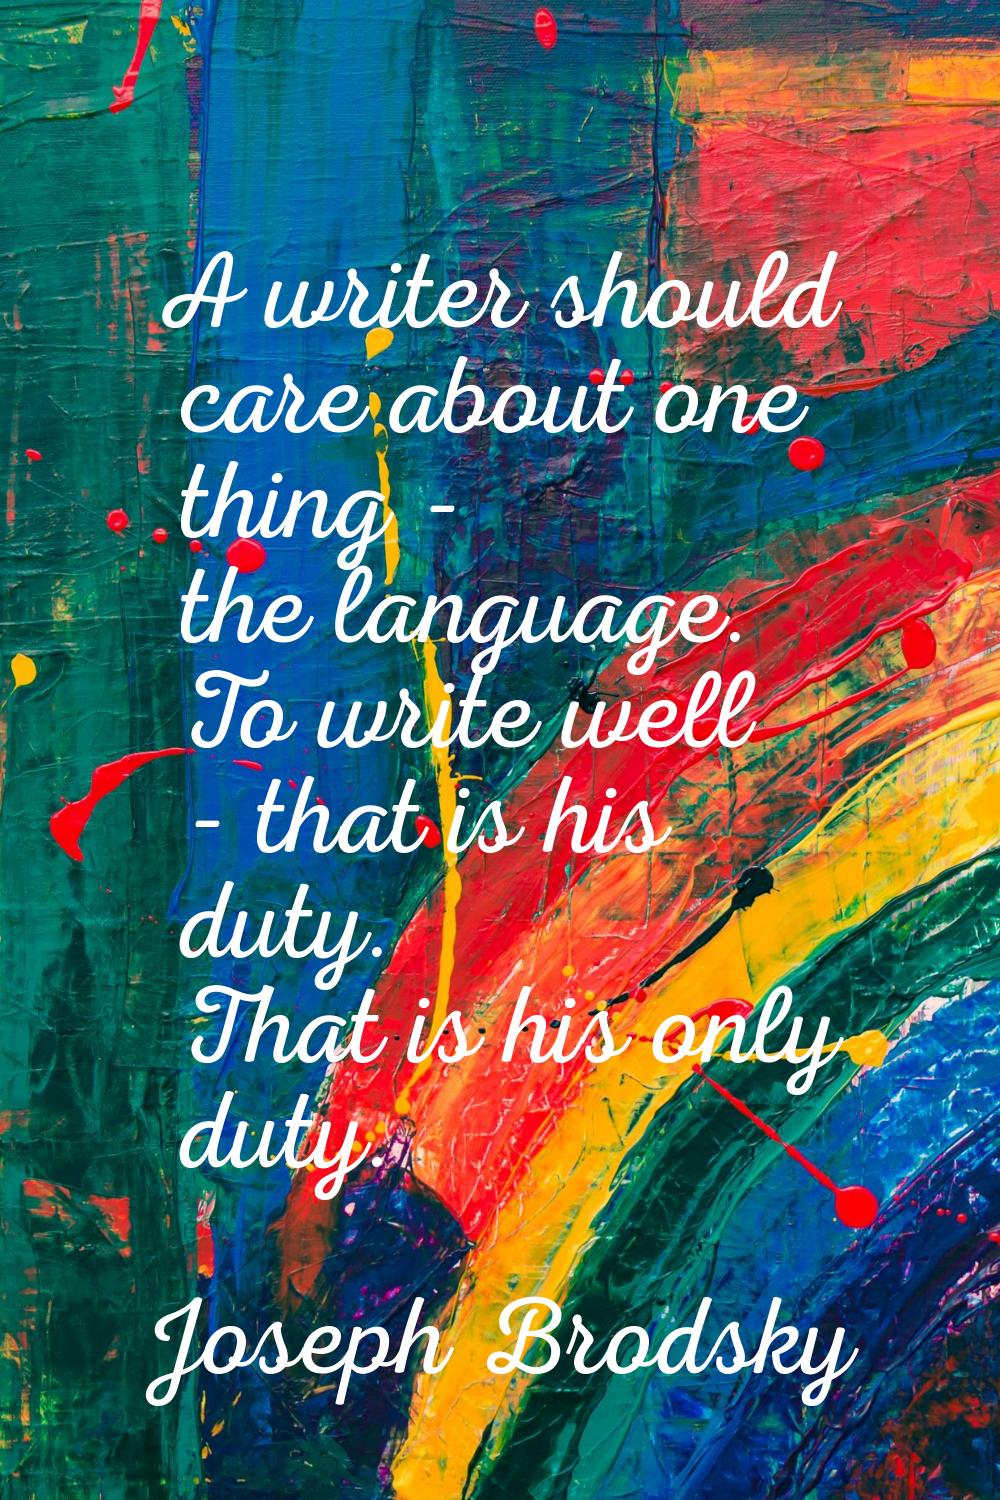 A writer should care about one thing - the language. To write well - that is his duty. That is his 